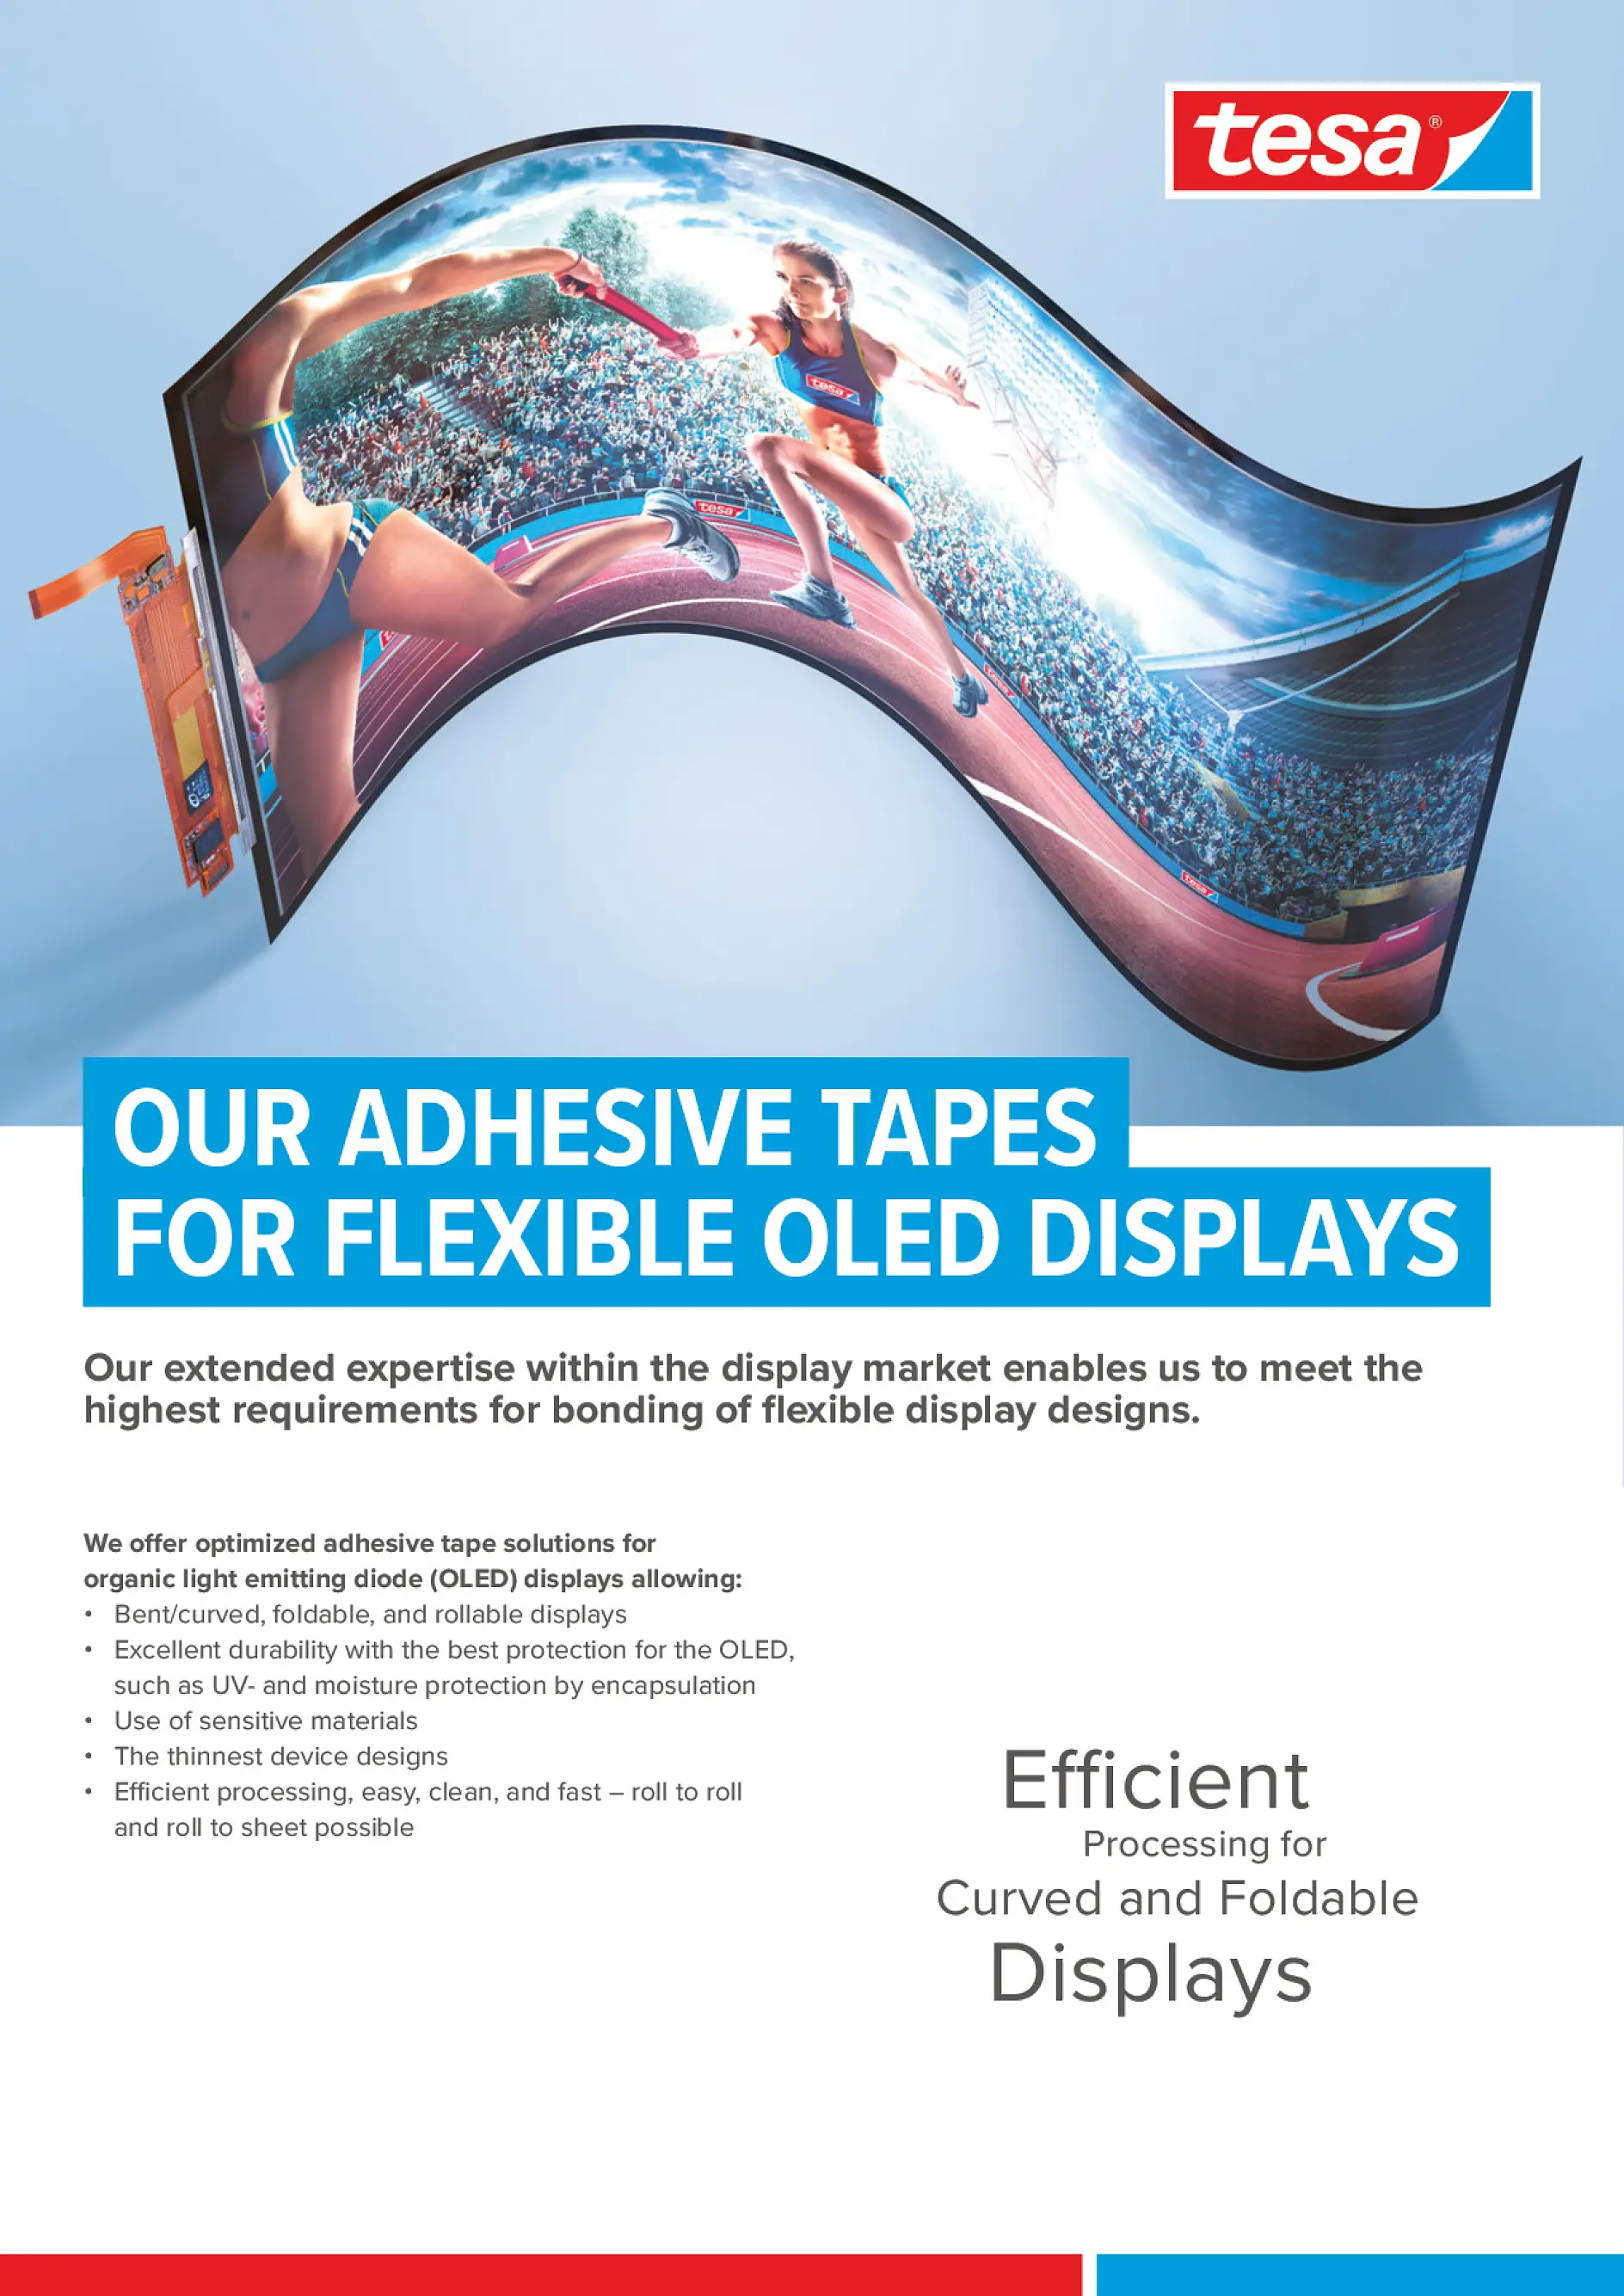 Our Adhesive Tapes for Flexible OLED Displays